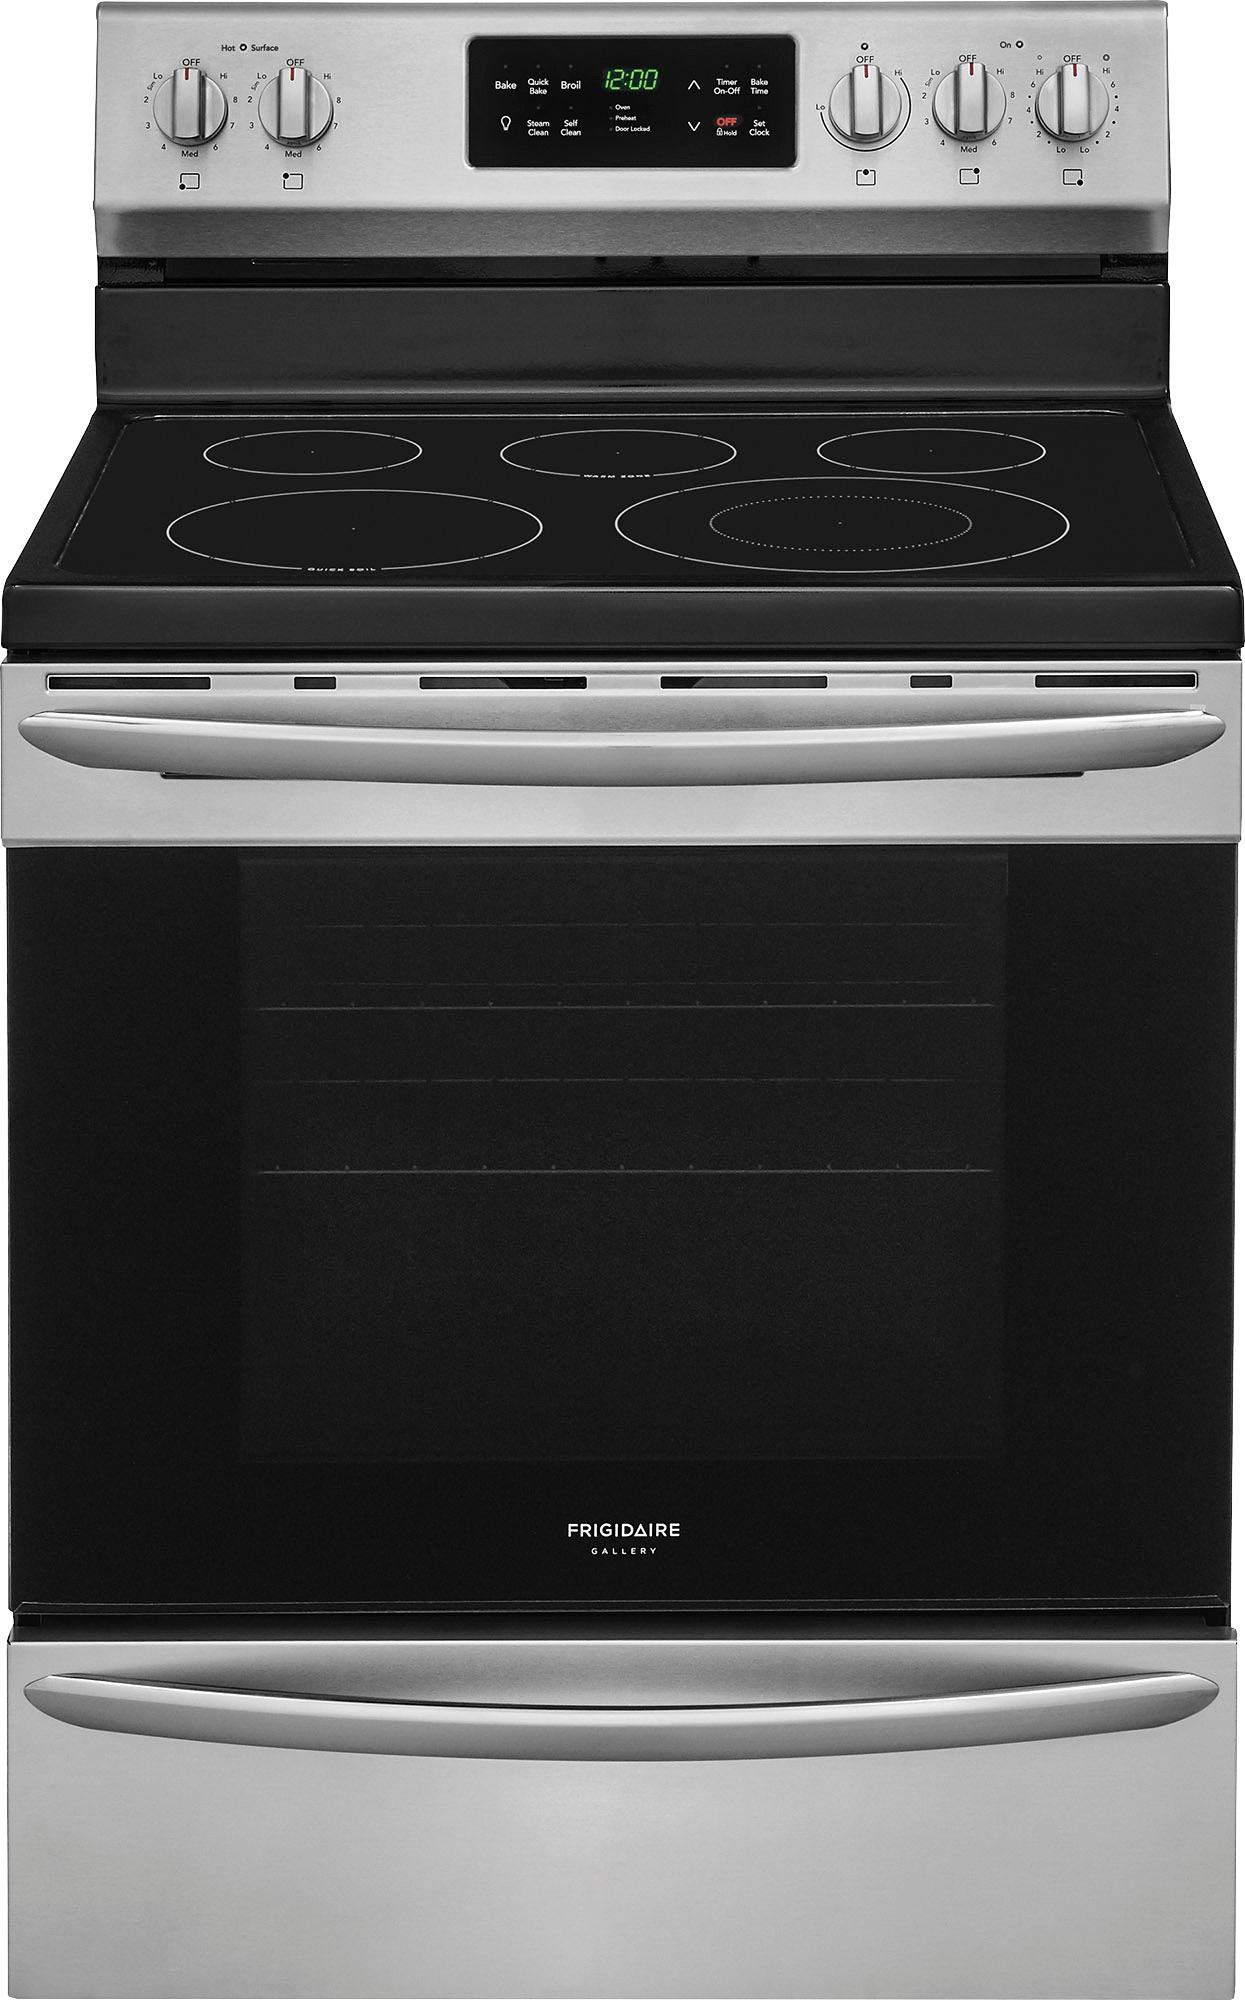 Frigidaire - Gallery 5.4 Cu. Ft. Self-Cleaning Freestanding Electric Convection Range - Stainless steel